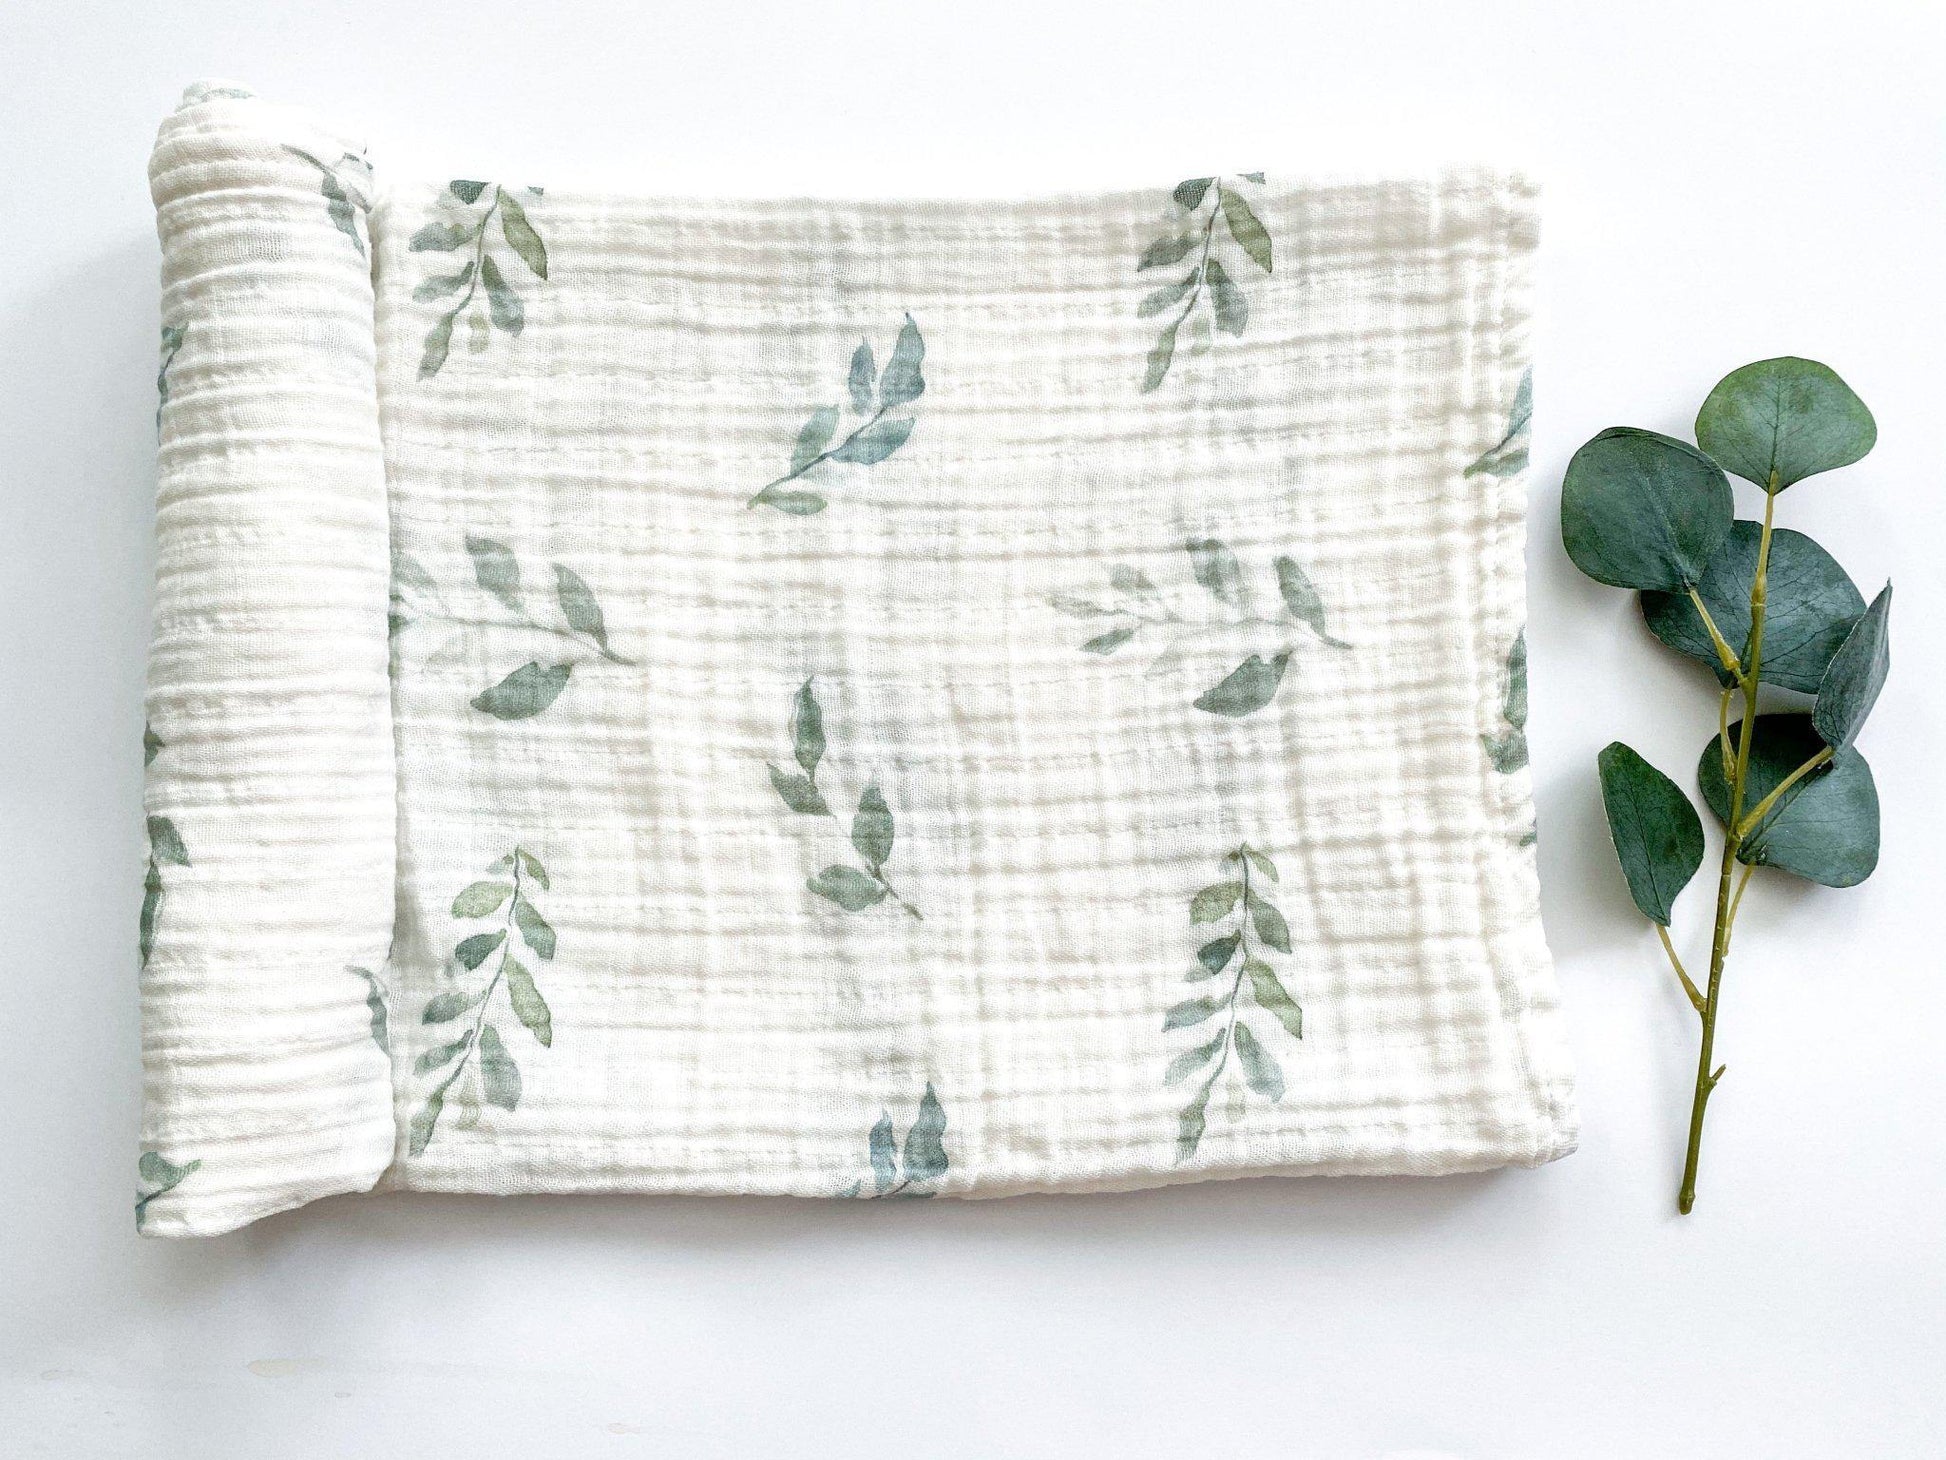 Green Leaves Bamboo Muslin Swaddle Blanket - Harp Angel Boutique